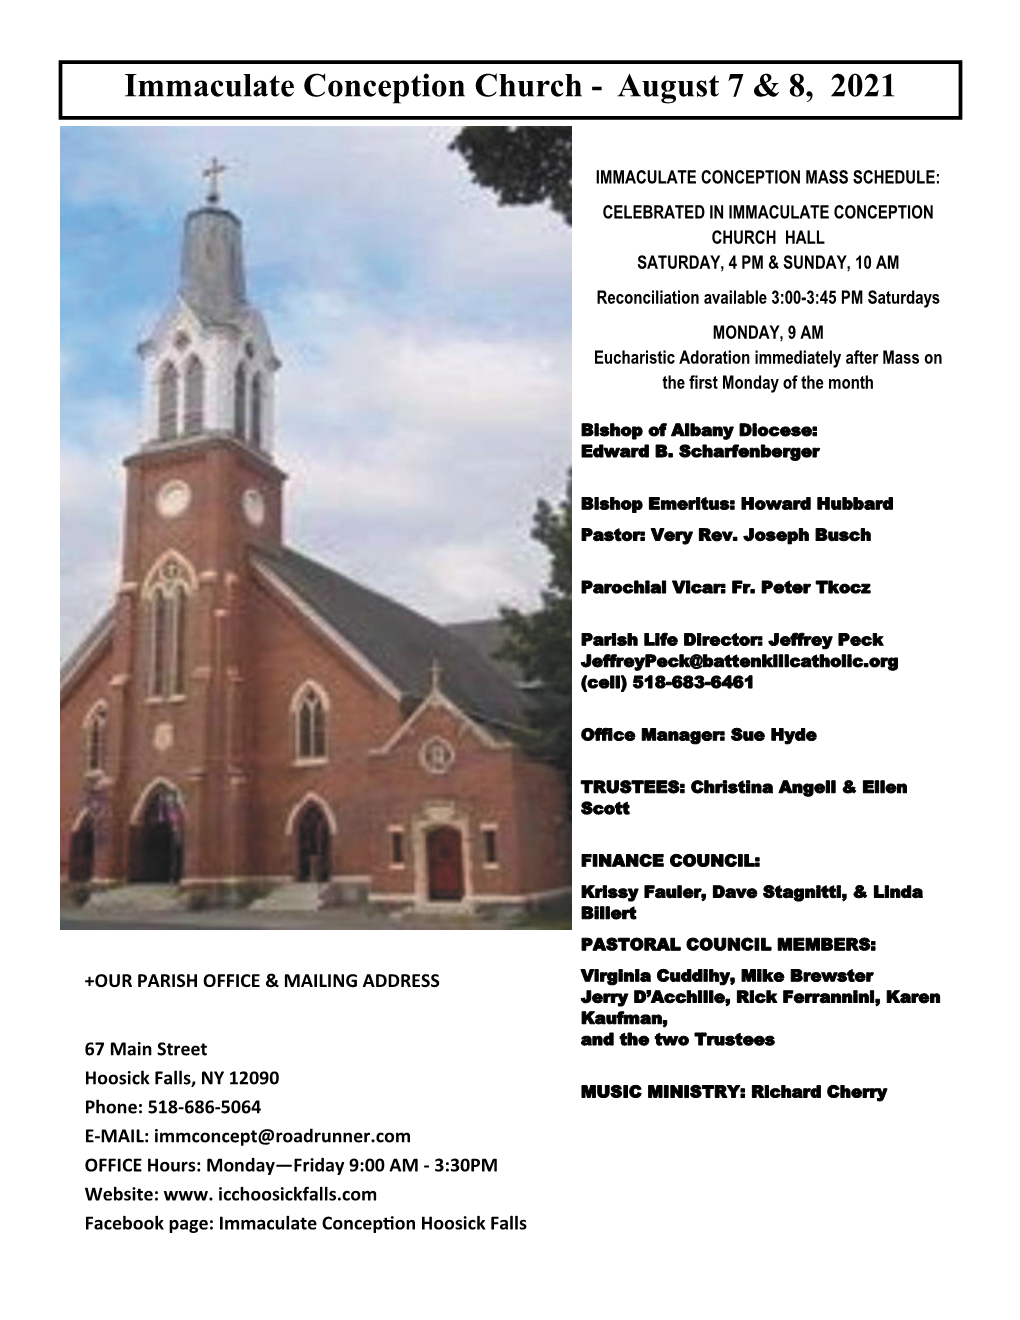 Immaculate Conception Church - August 7 & 8, 2021